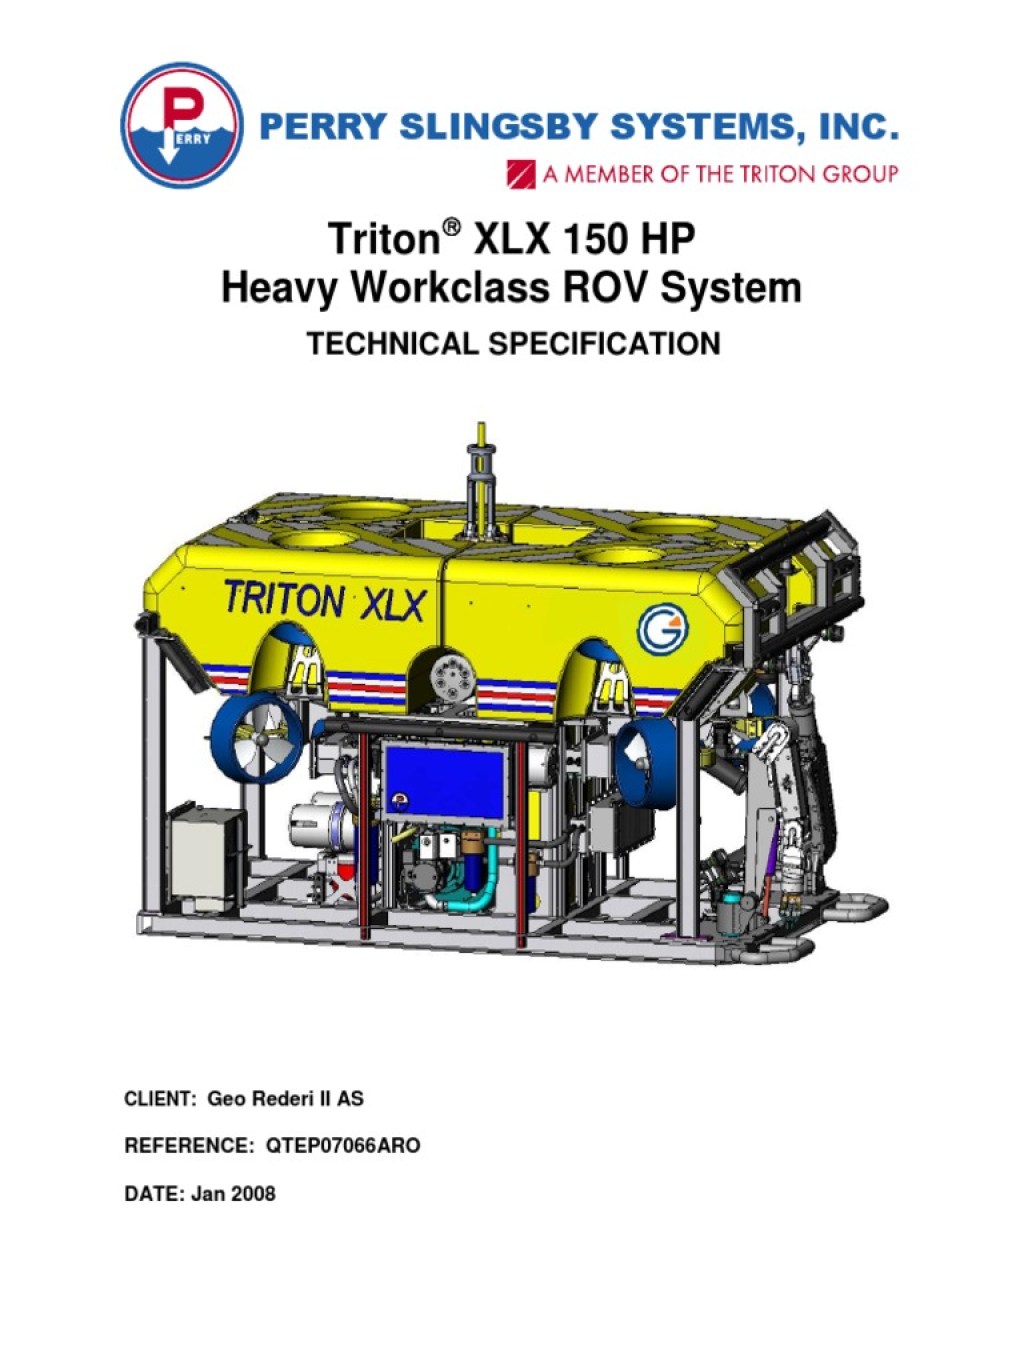 Picture of: Triton XLX  HP Heavy Workclass ROV System: Perry Slingsby